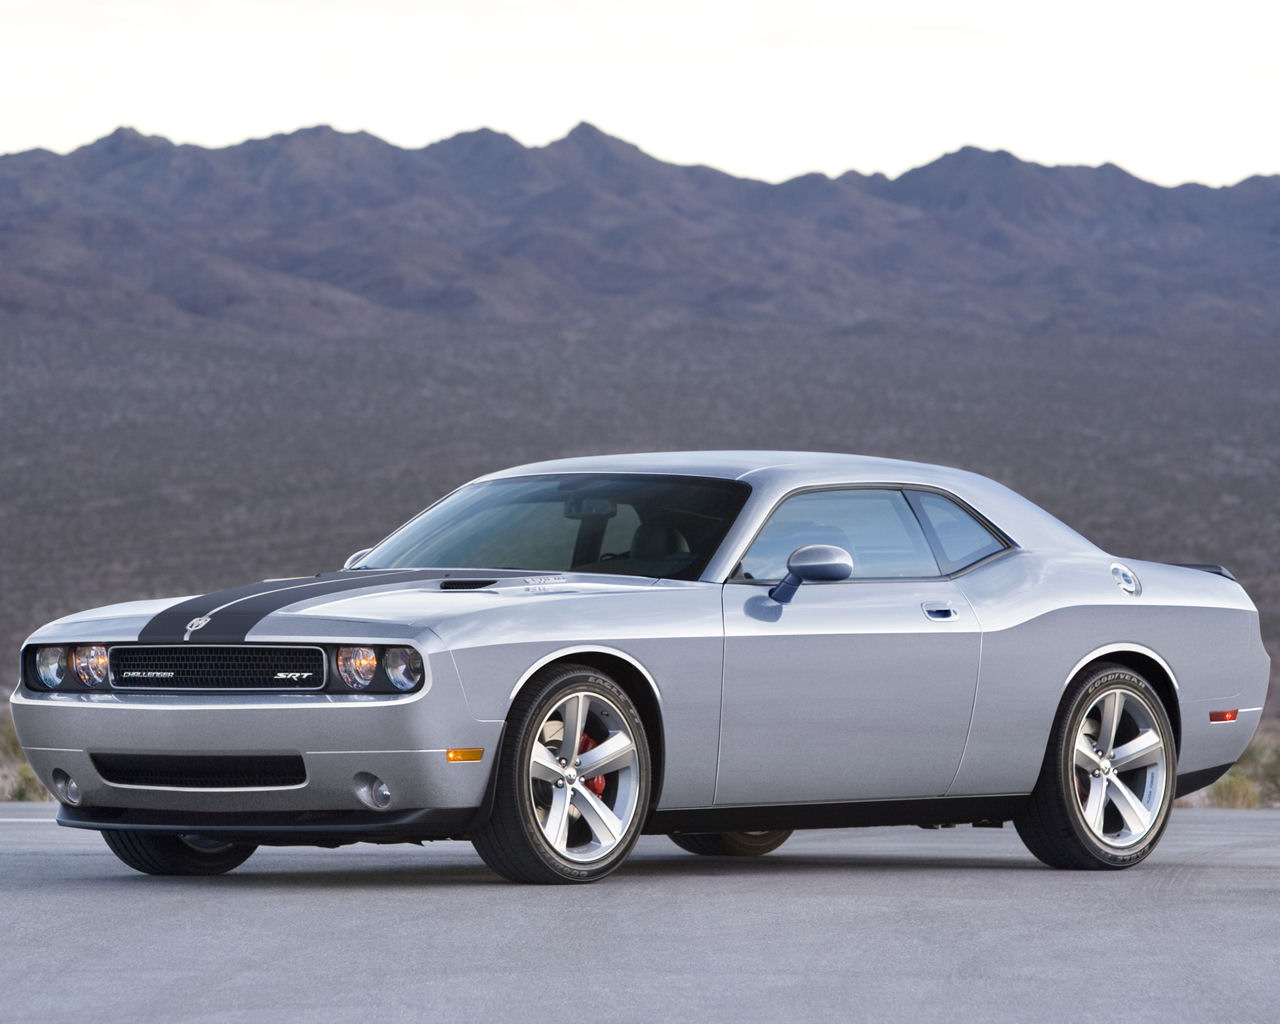 Please right click on the Dodge Challenger wallpaper below and choose